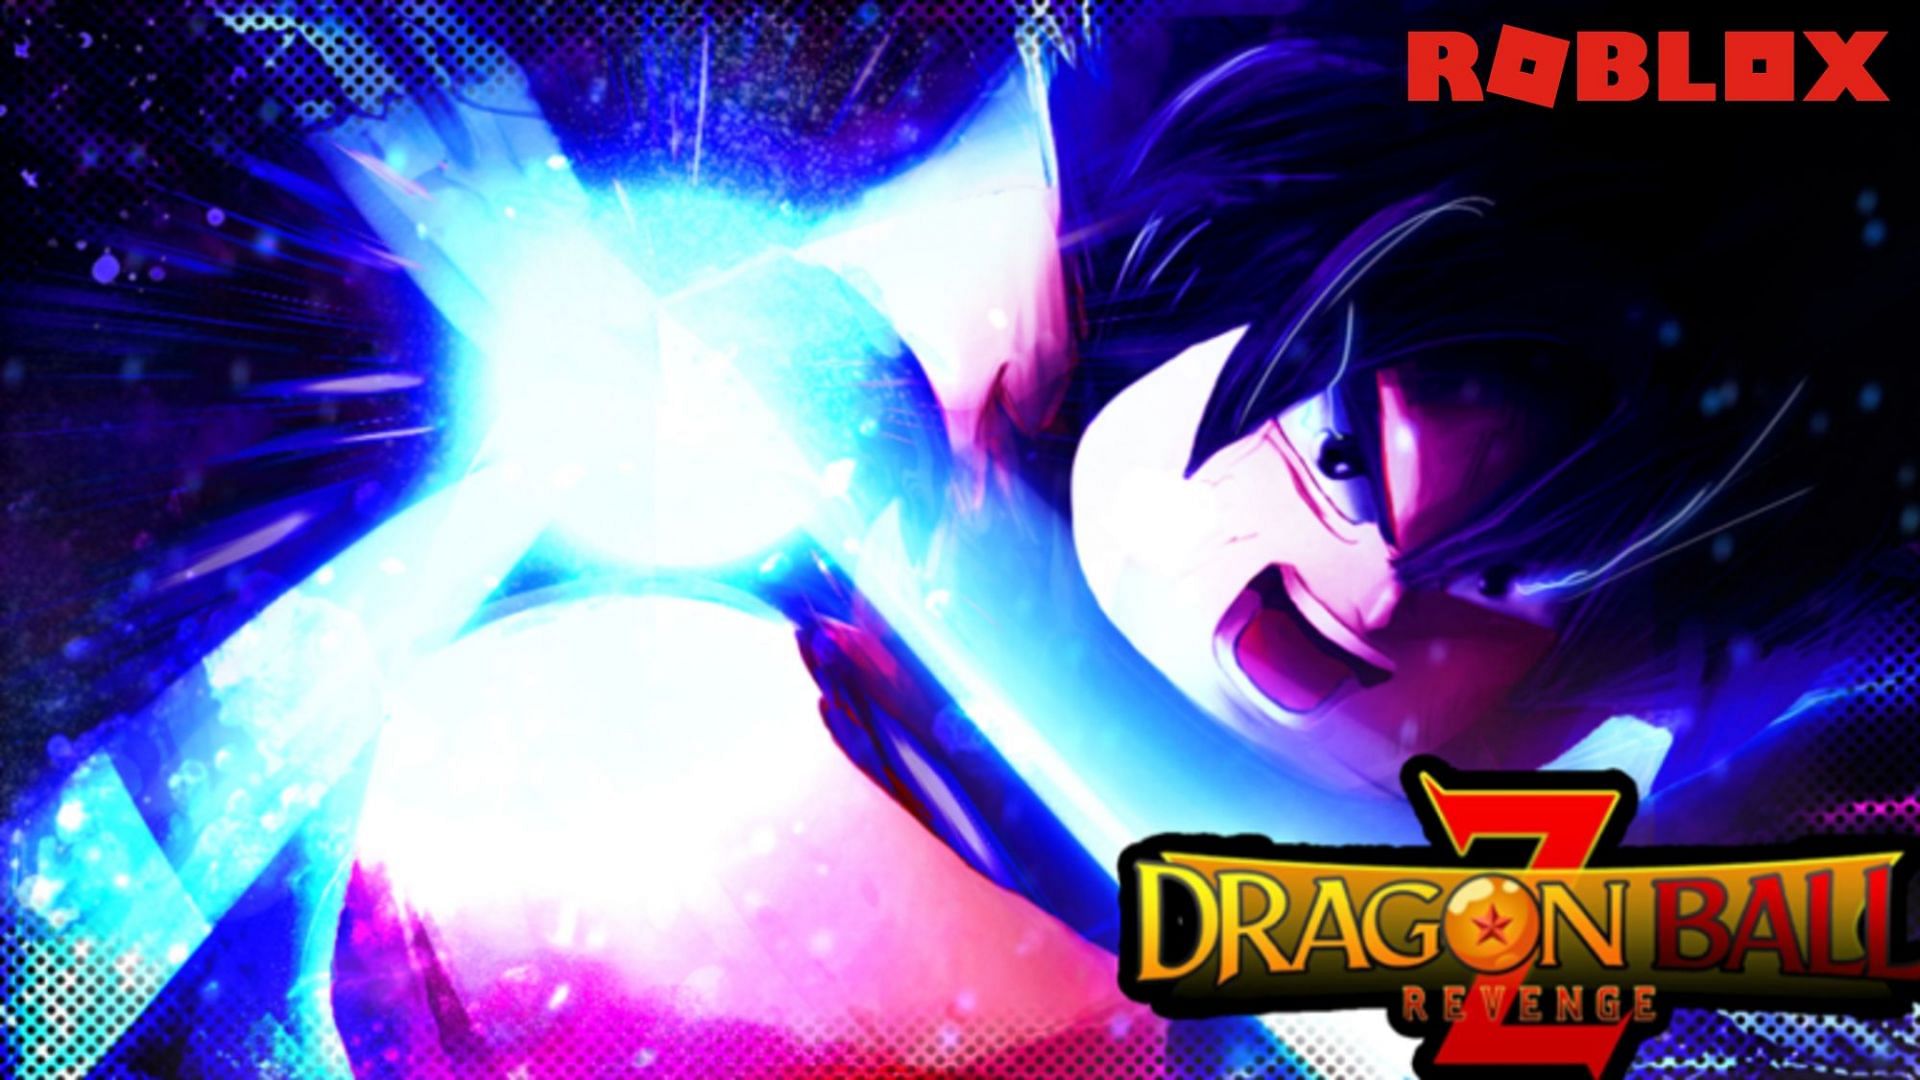 Roblox Dragon Ball Revenge codes (June 2022) Free stats and more